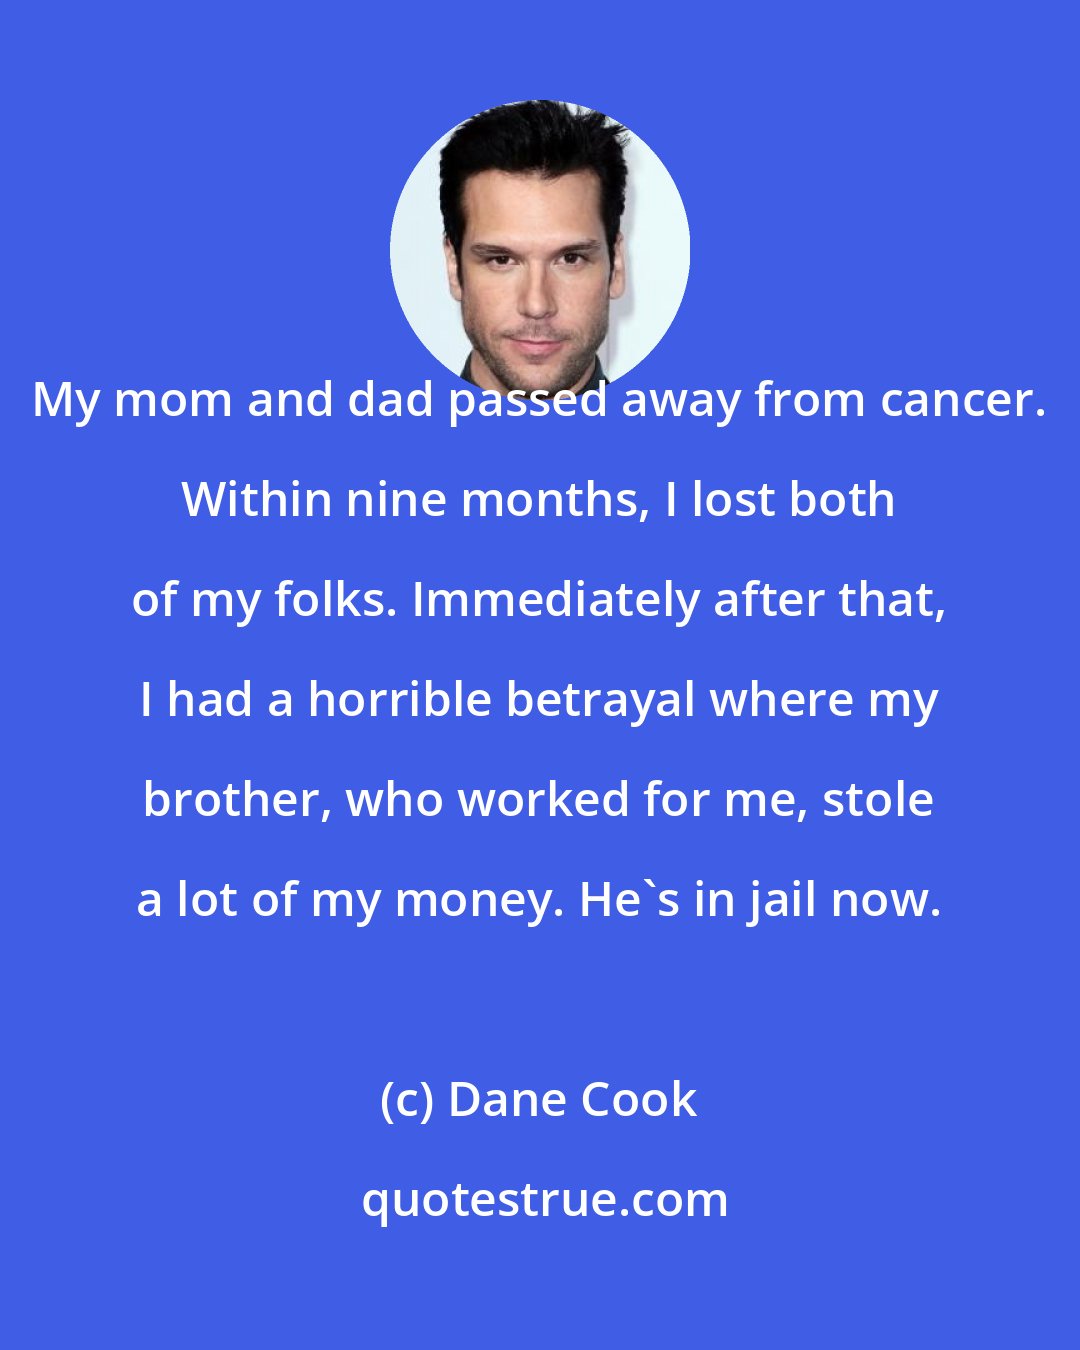 Dane Cook: My mom and dad passed away from cancer. Within nine months, I lost both of my folks. Immediately after that, I had a horrible betrayal where my brother, who worked for me, stole a lot of my money. He's in jail now.